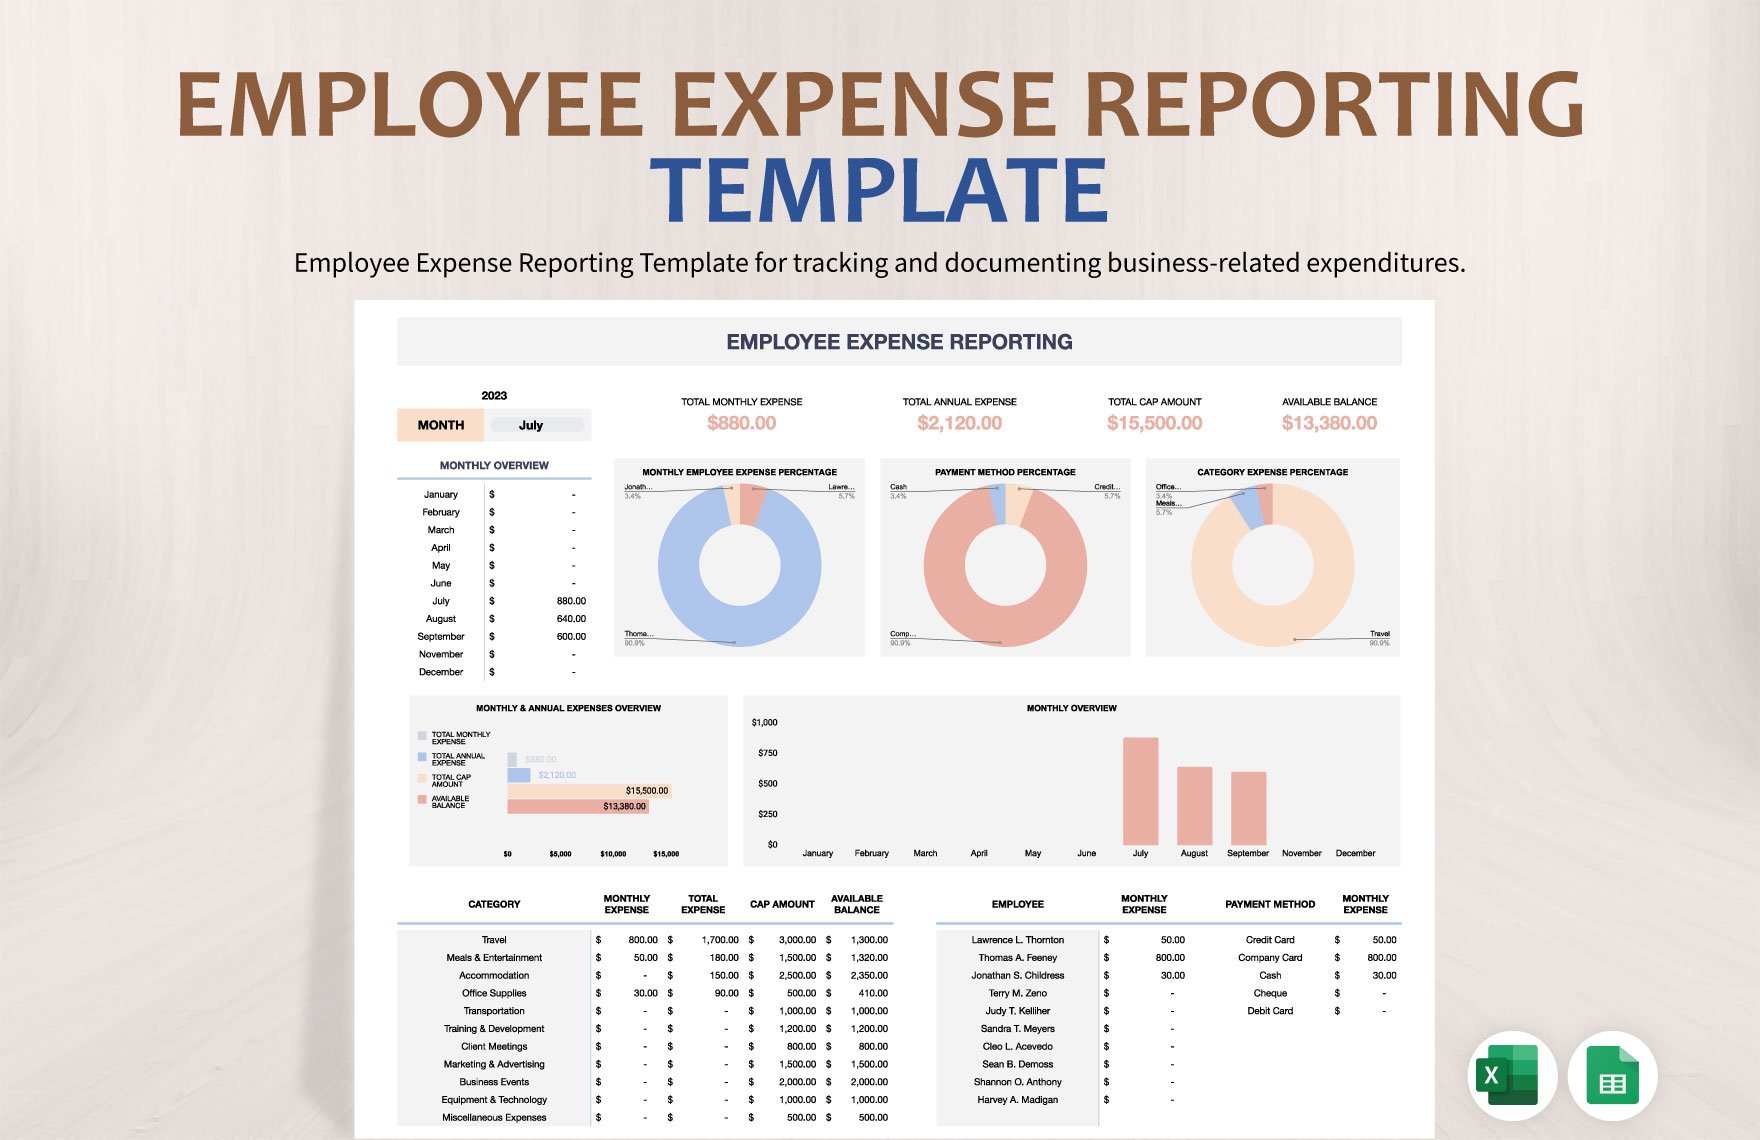 Employee Expense Reporting Template in Excel, Google Sheets